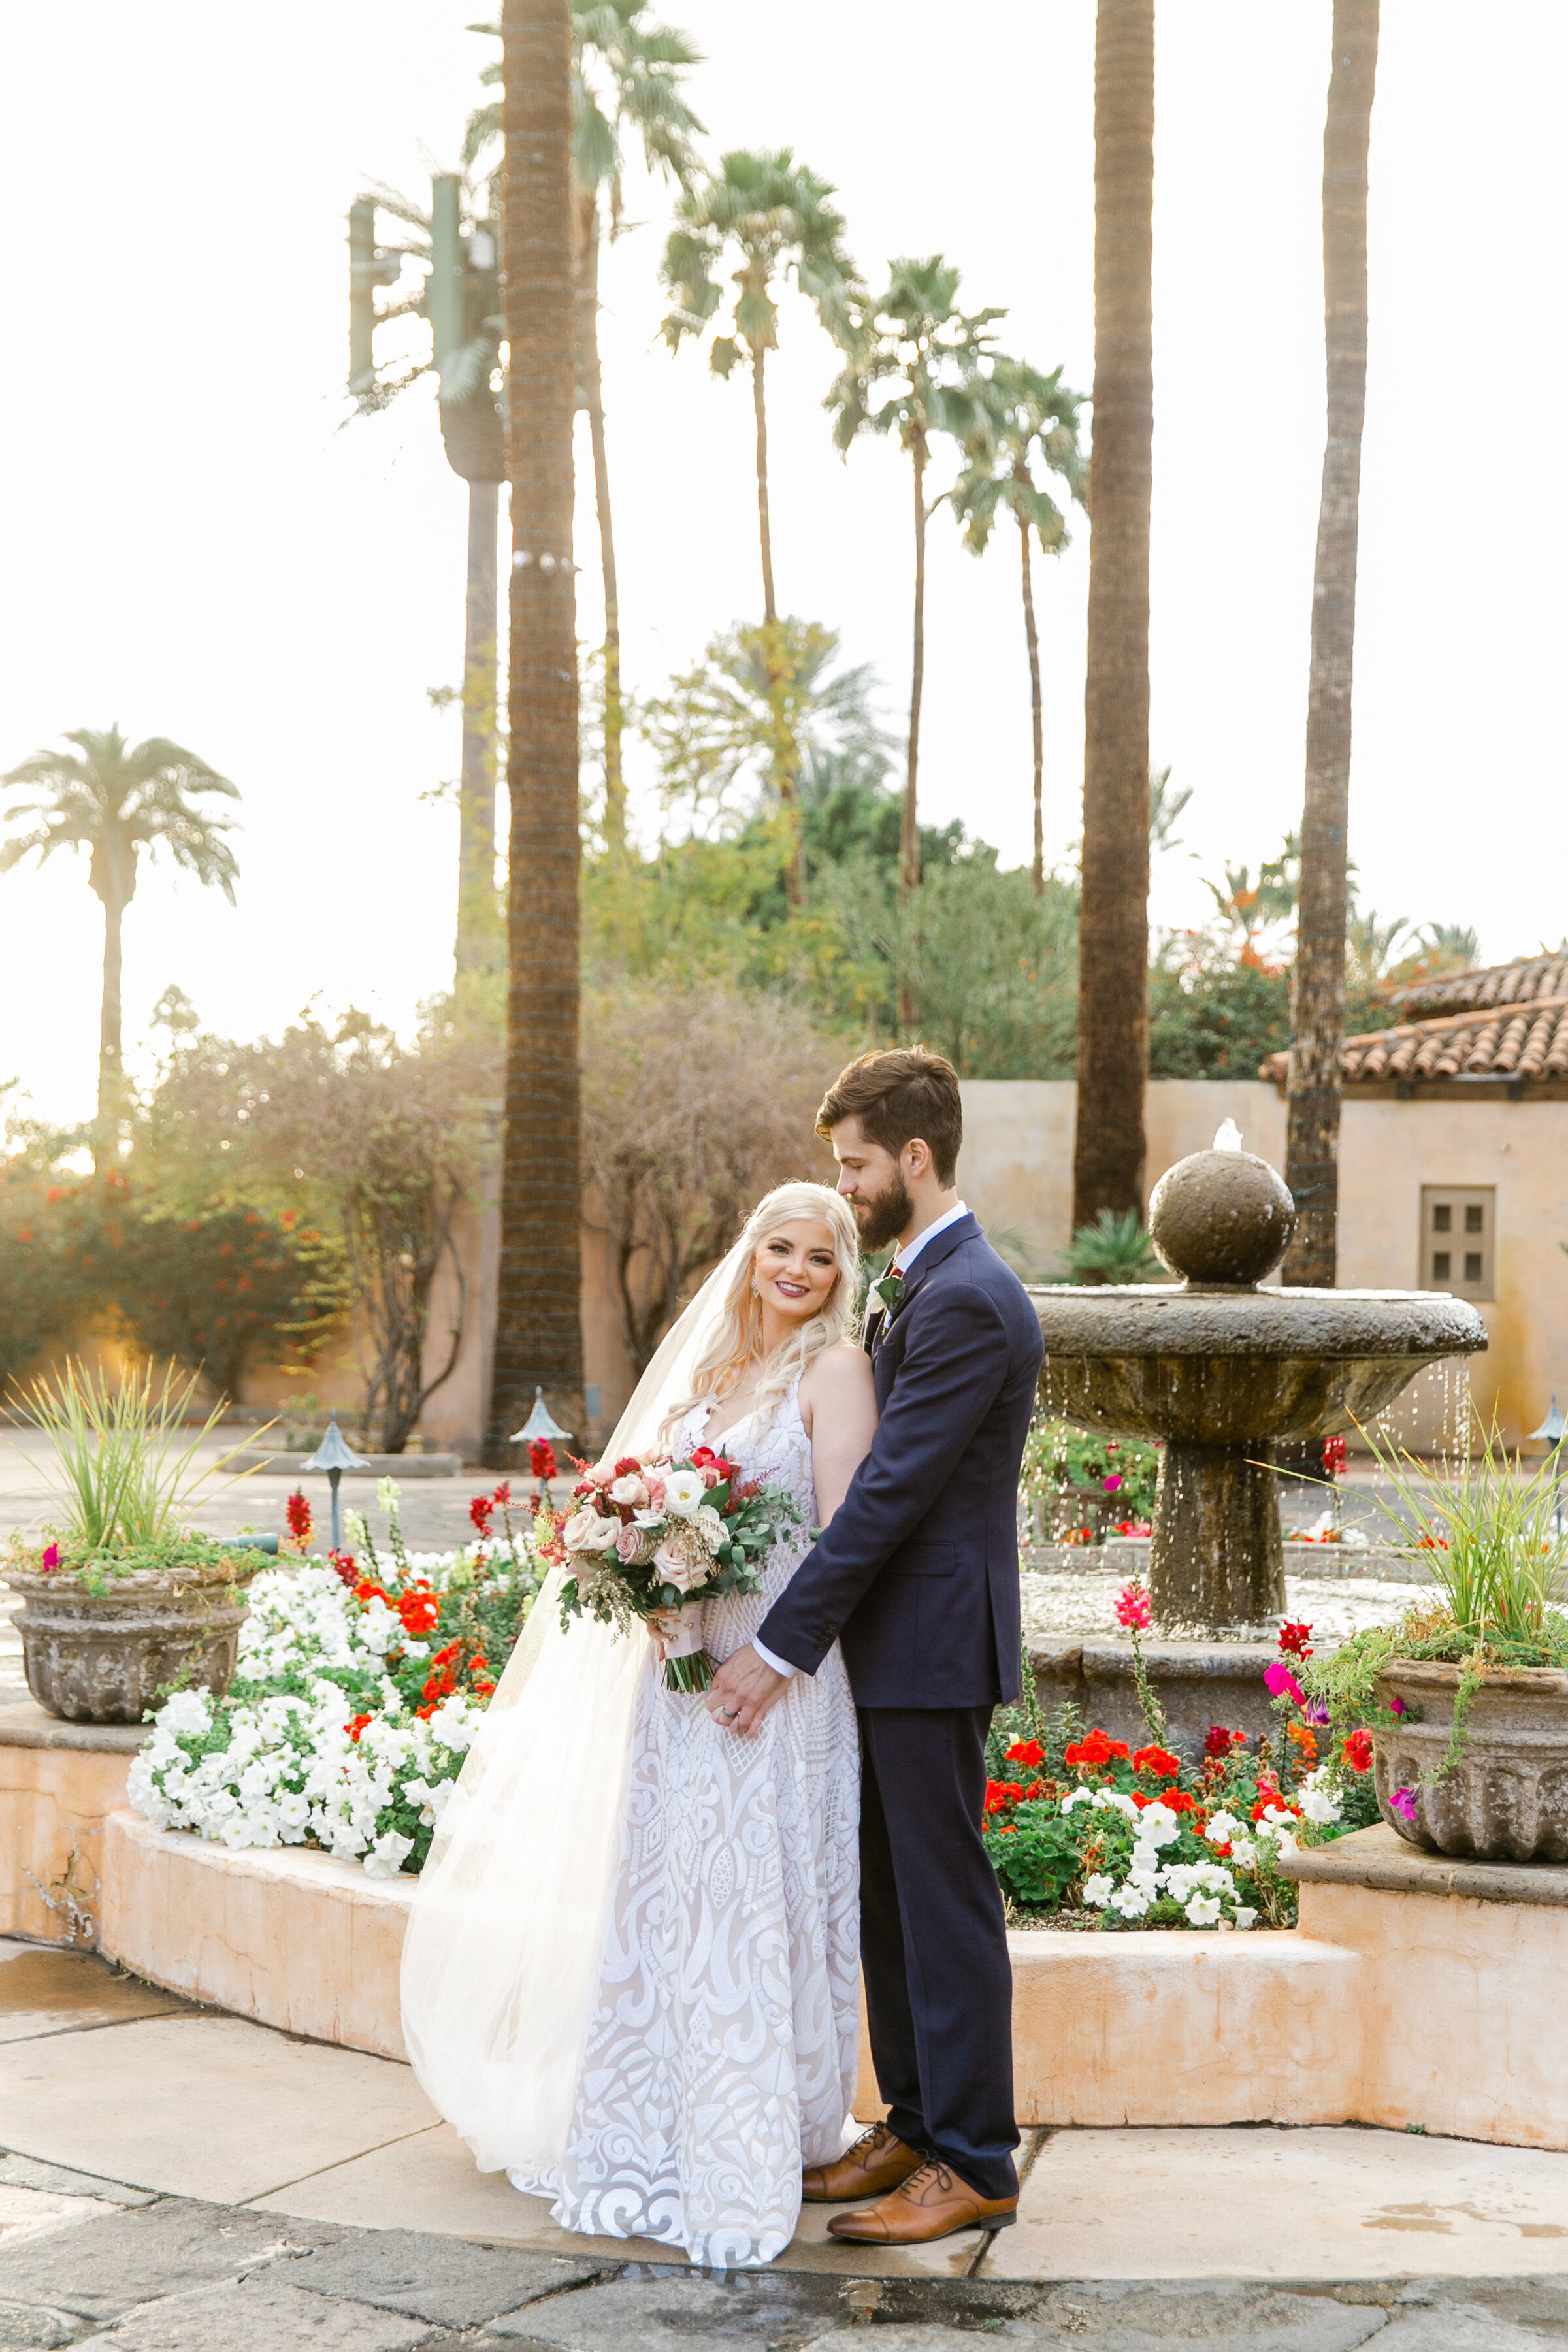 Karlie Colleen Photography - The Royal Palms Wedding - Some Like It Classic - Alex & Sam-537